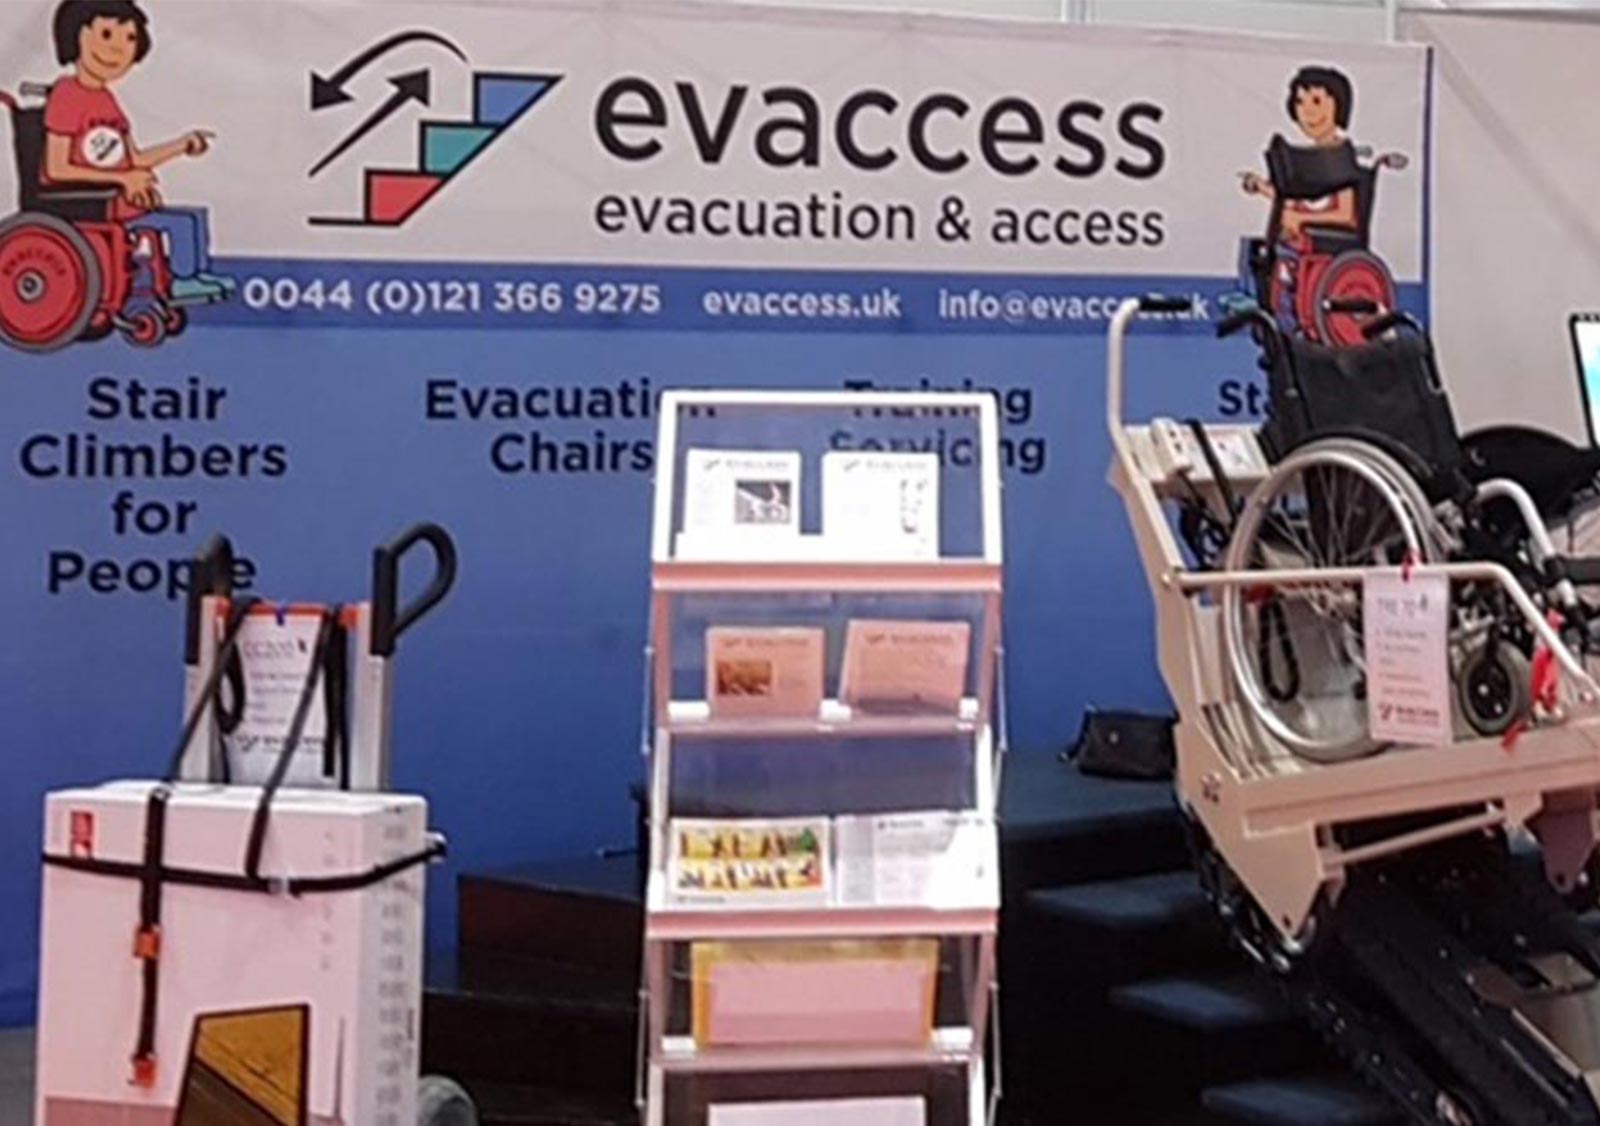 Evaccess Show Stand